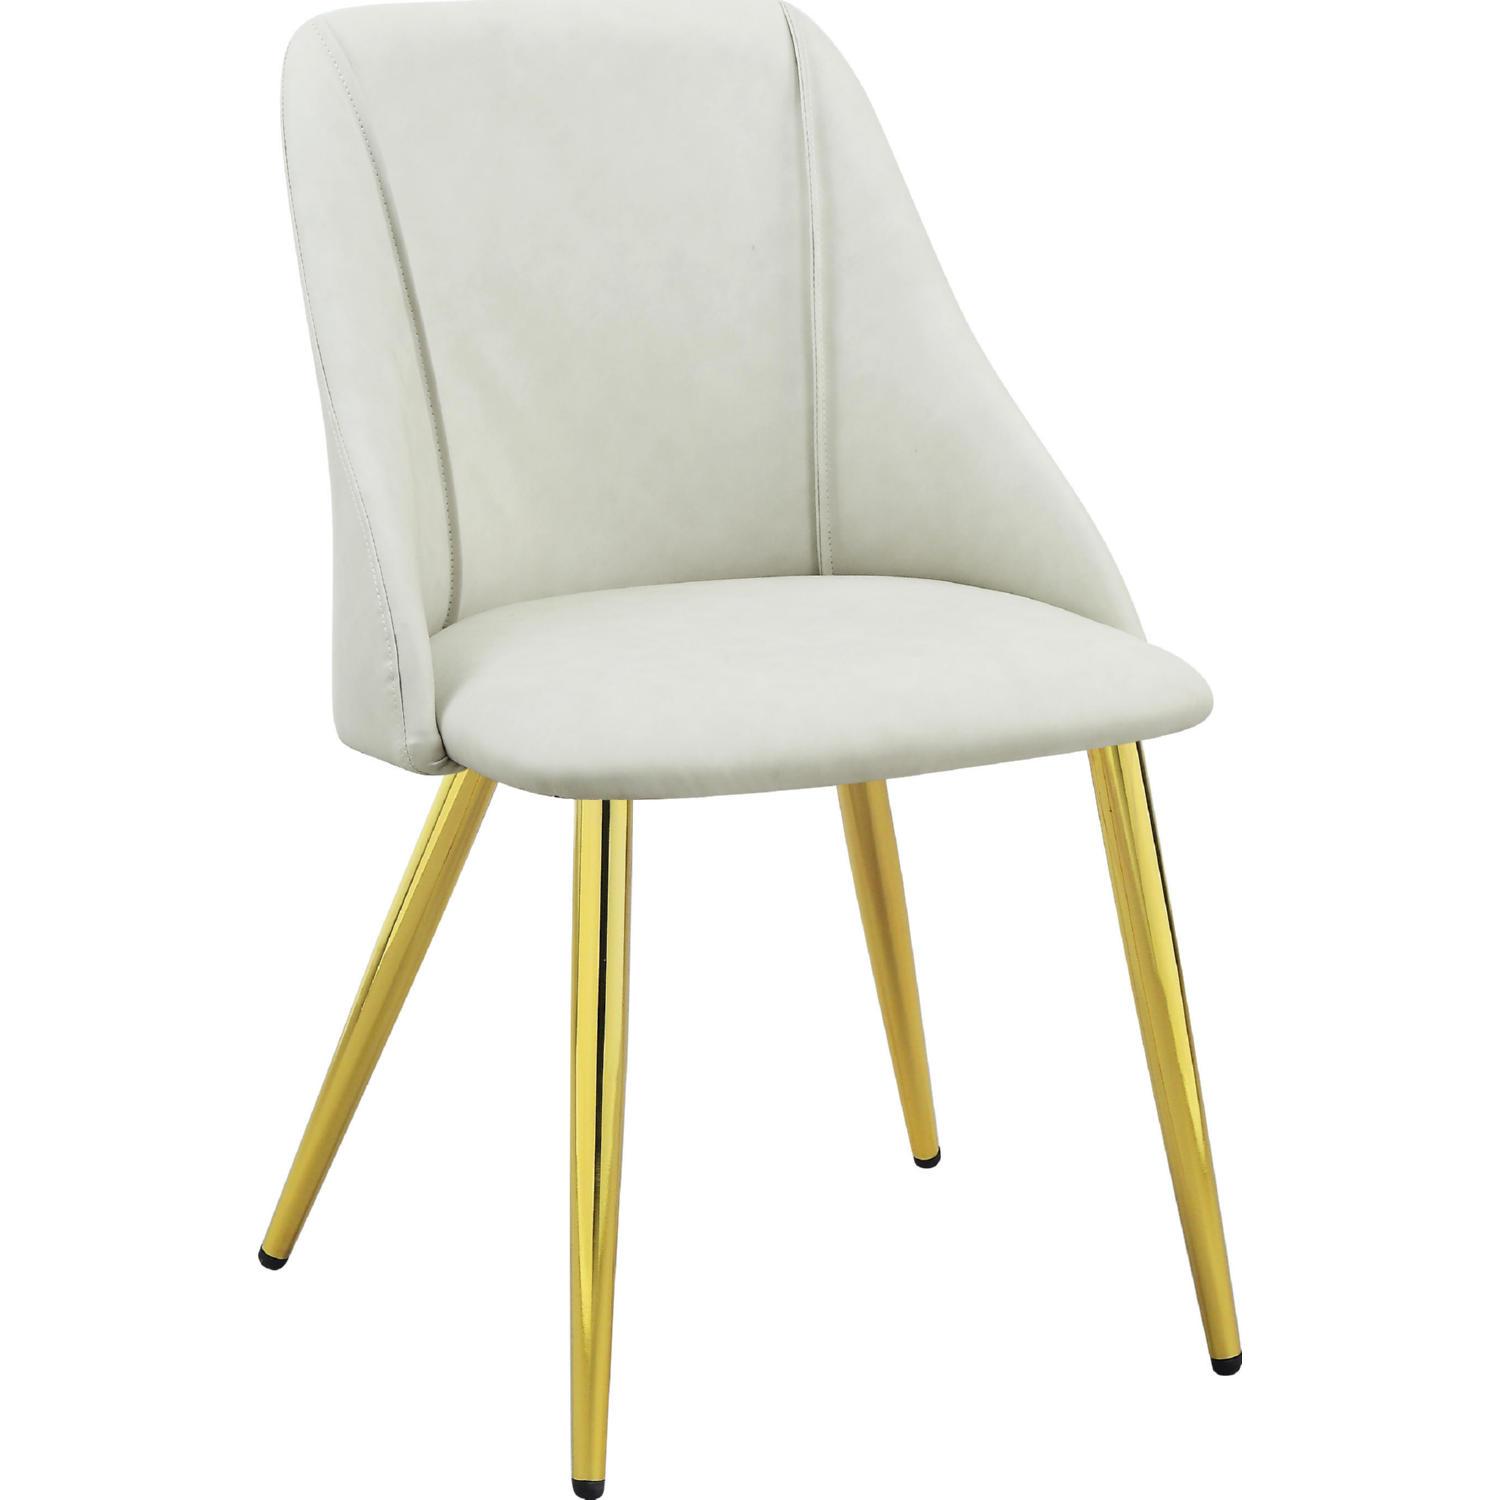 Modern, Casual Side Chair Set Gaines DN01259-2pcs in White PU